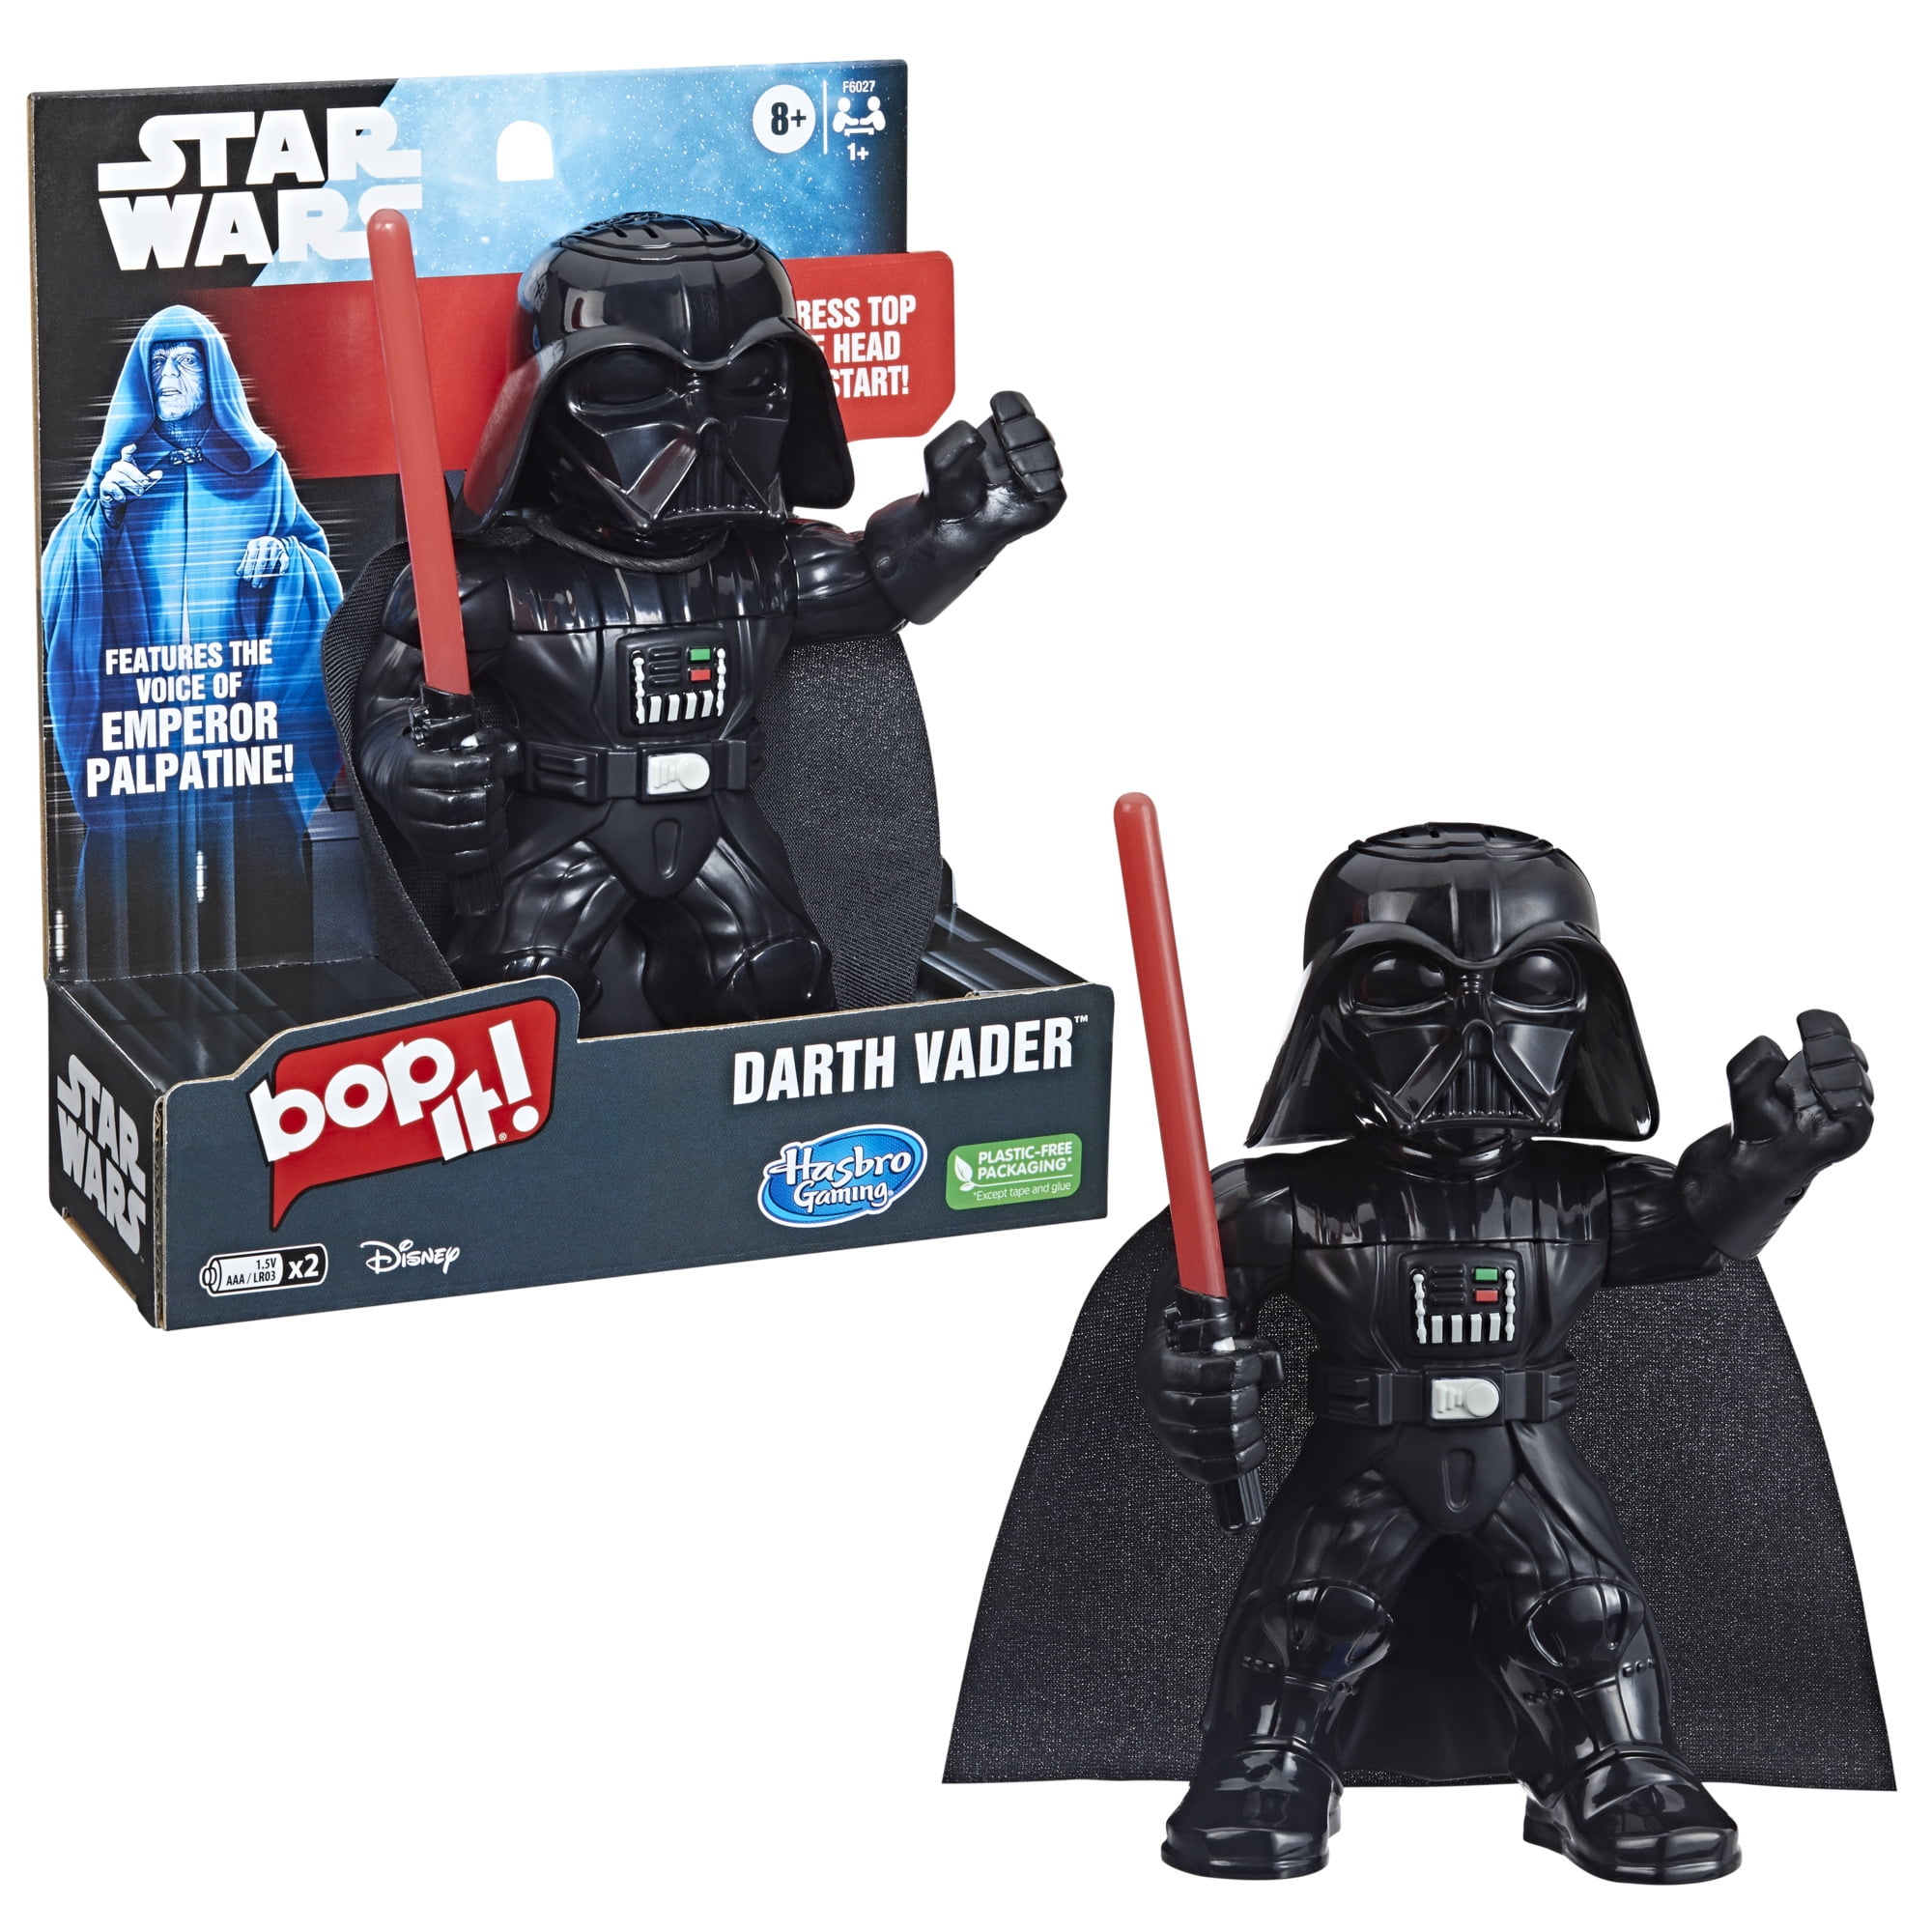 Bop It! Electronic Game for Kids Star Wars Darth Vader Edition, by Hasbro